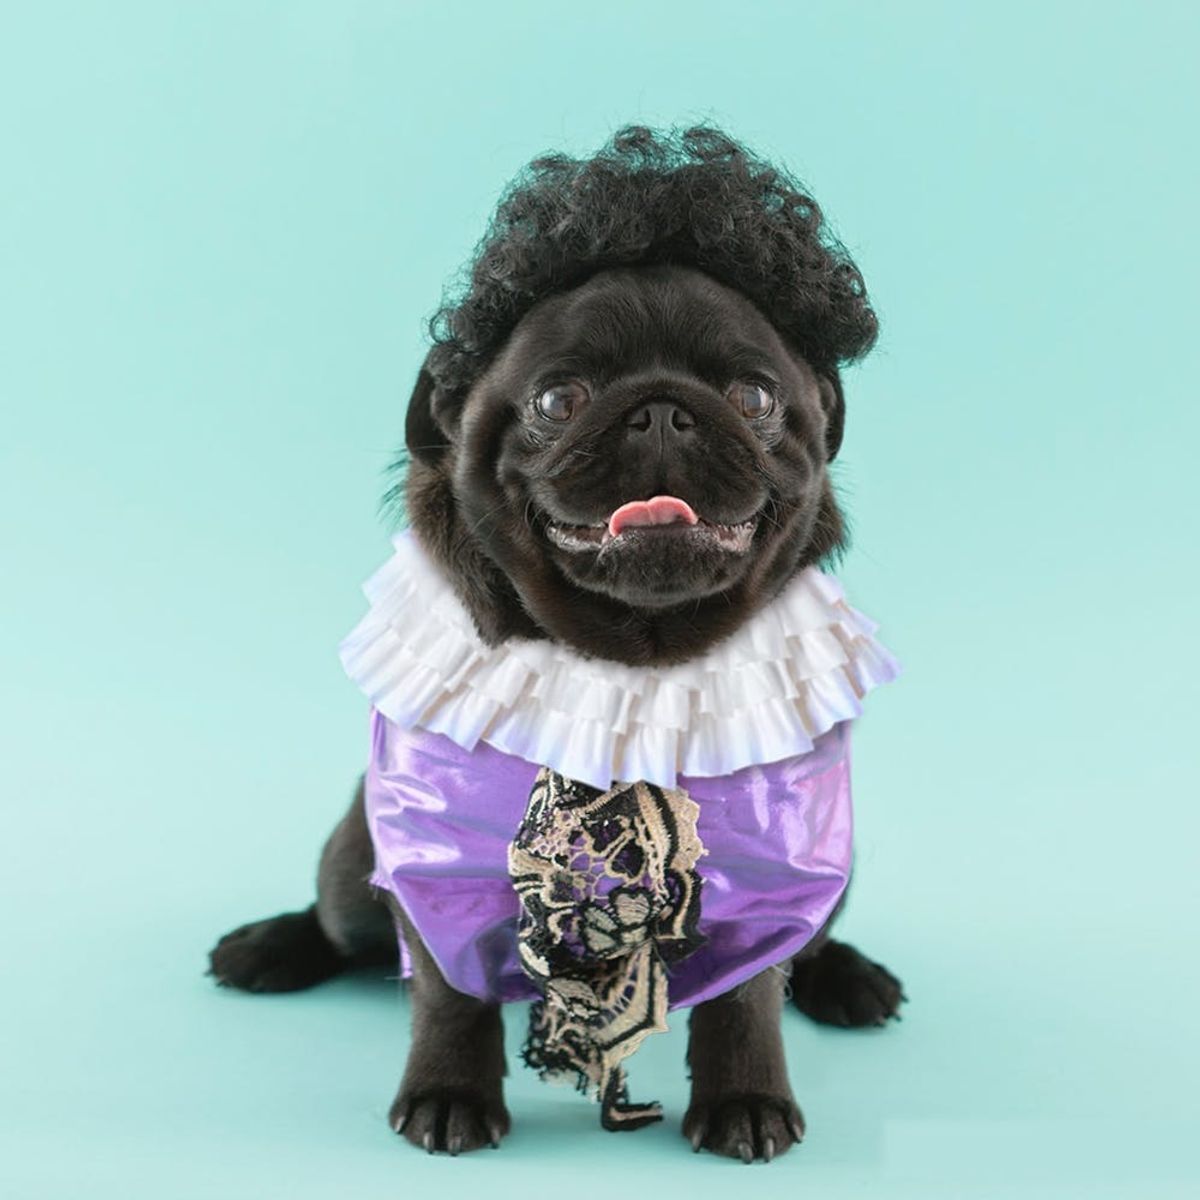 Show Off Your Pup’s Costume on Snapchat Discover With Our Dogs of Instagram Contest